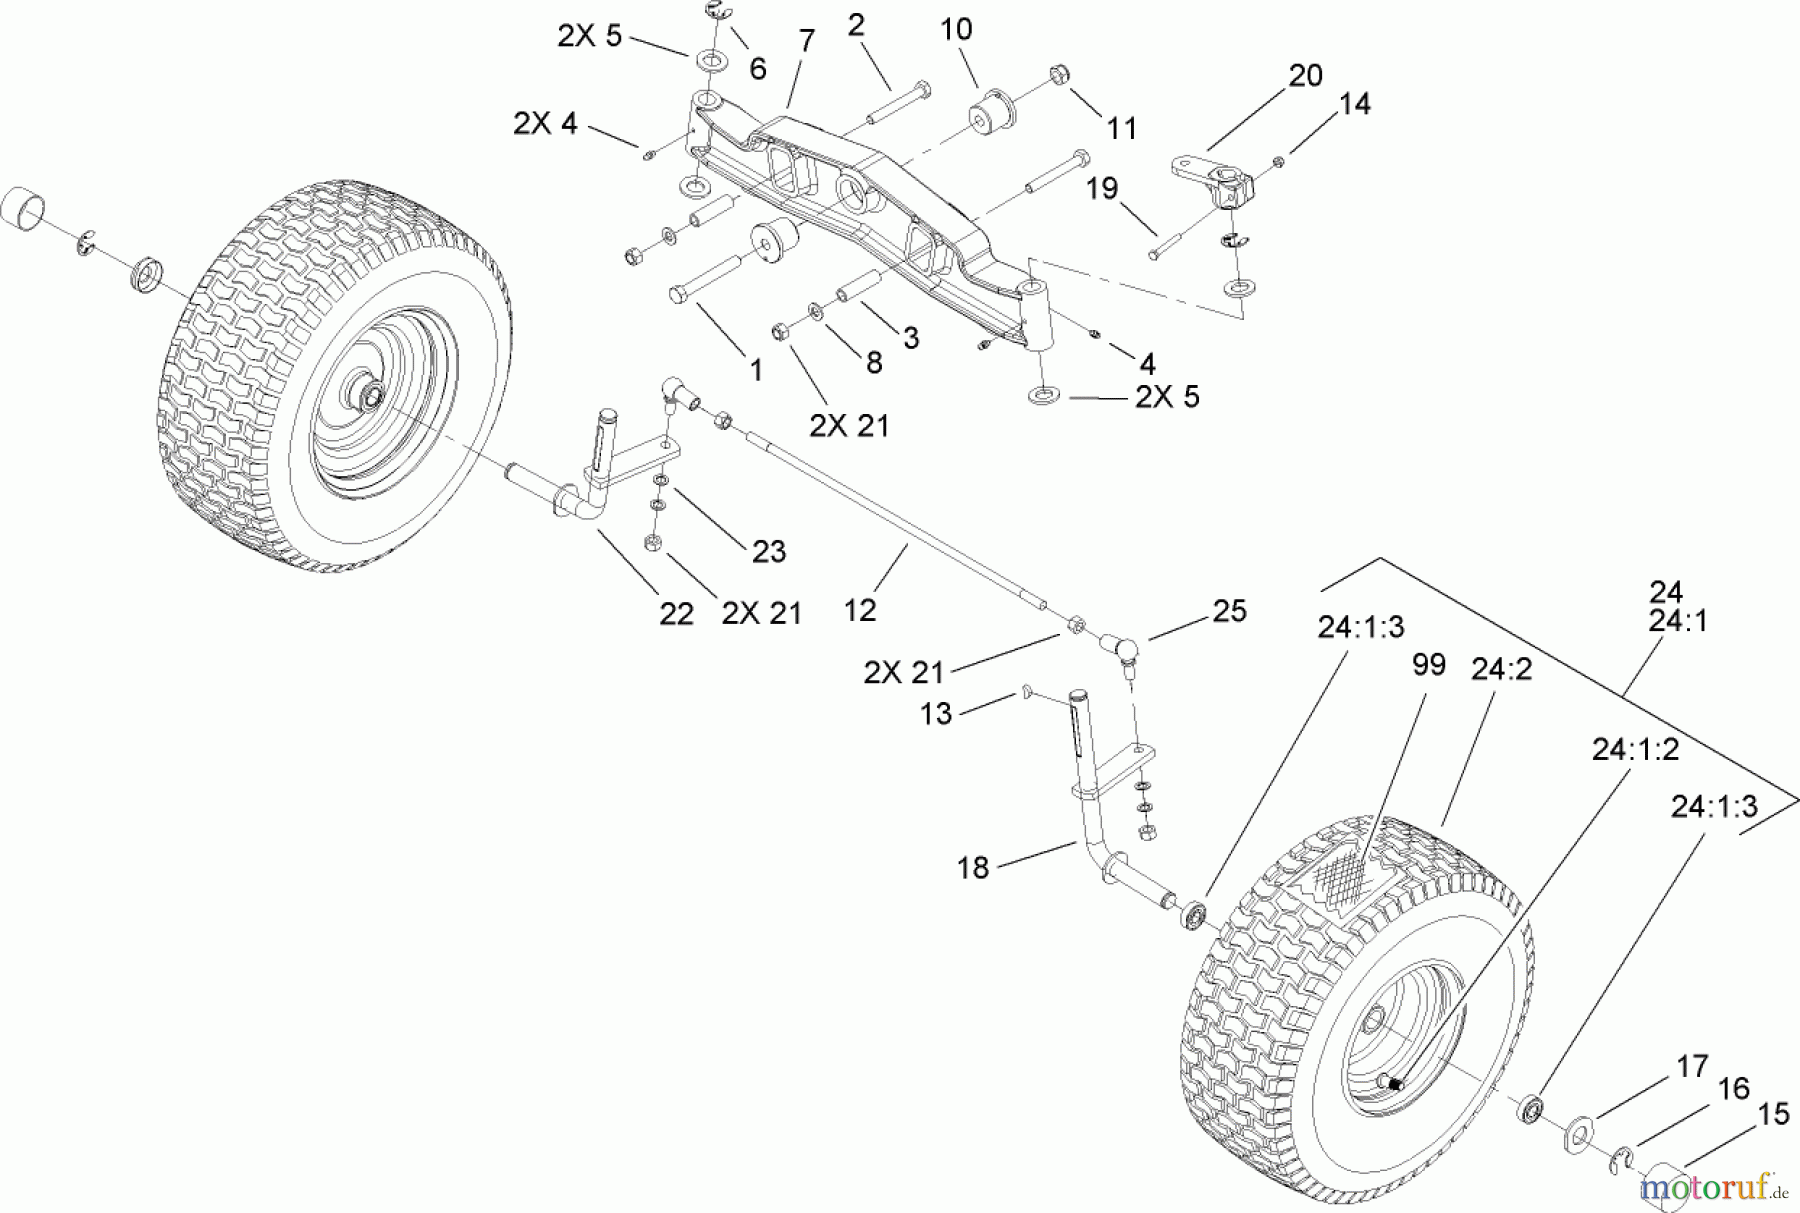  Toro Neu Mowers, Lawn & Garden Tractor Seite 1 74573 (DH 200) - Toro DH 200 Lawn Tractor, 2009 (290000481-290999999) FRONT AXLE ASSEMBLY